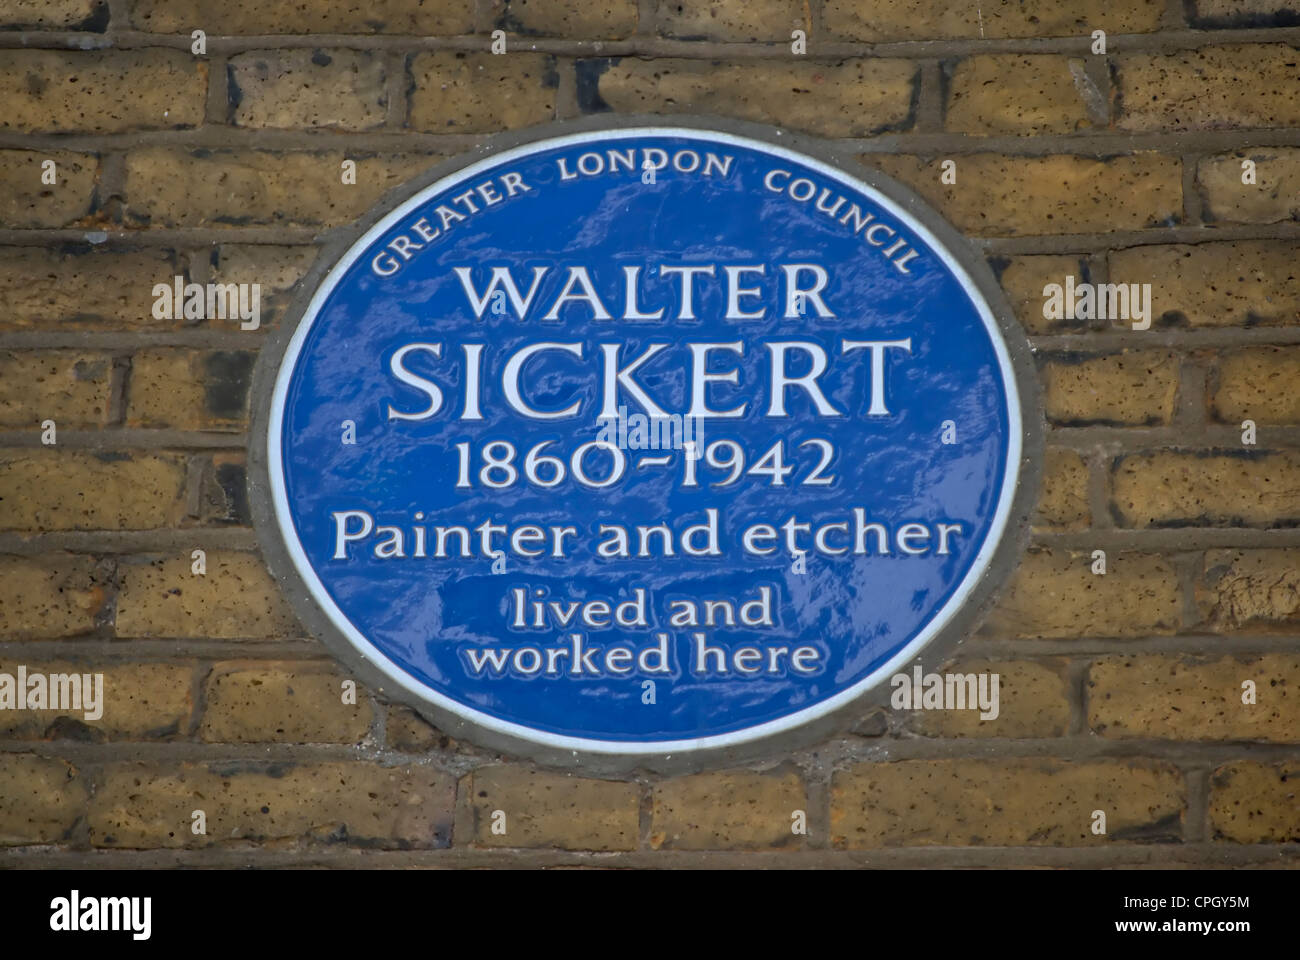 greater london council blue plaque marking a home and workplace of artist walter sickert, camden, london, england Stock Photo